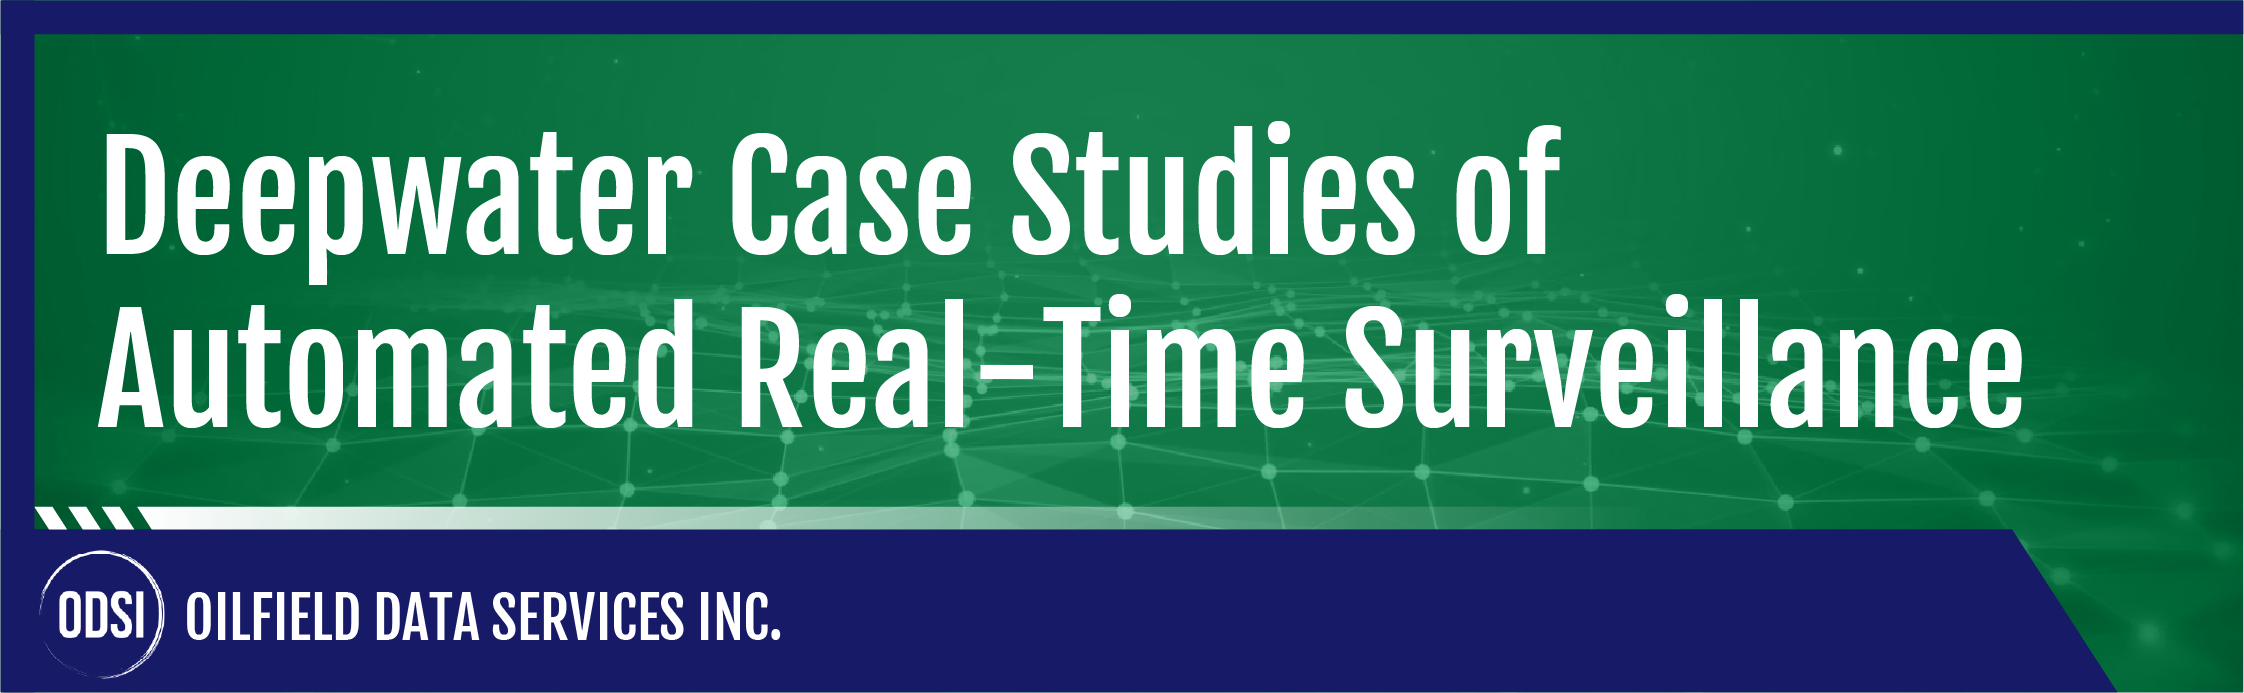 Deepwater Case Studies of Automated Real-Time Surveillance